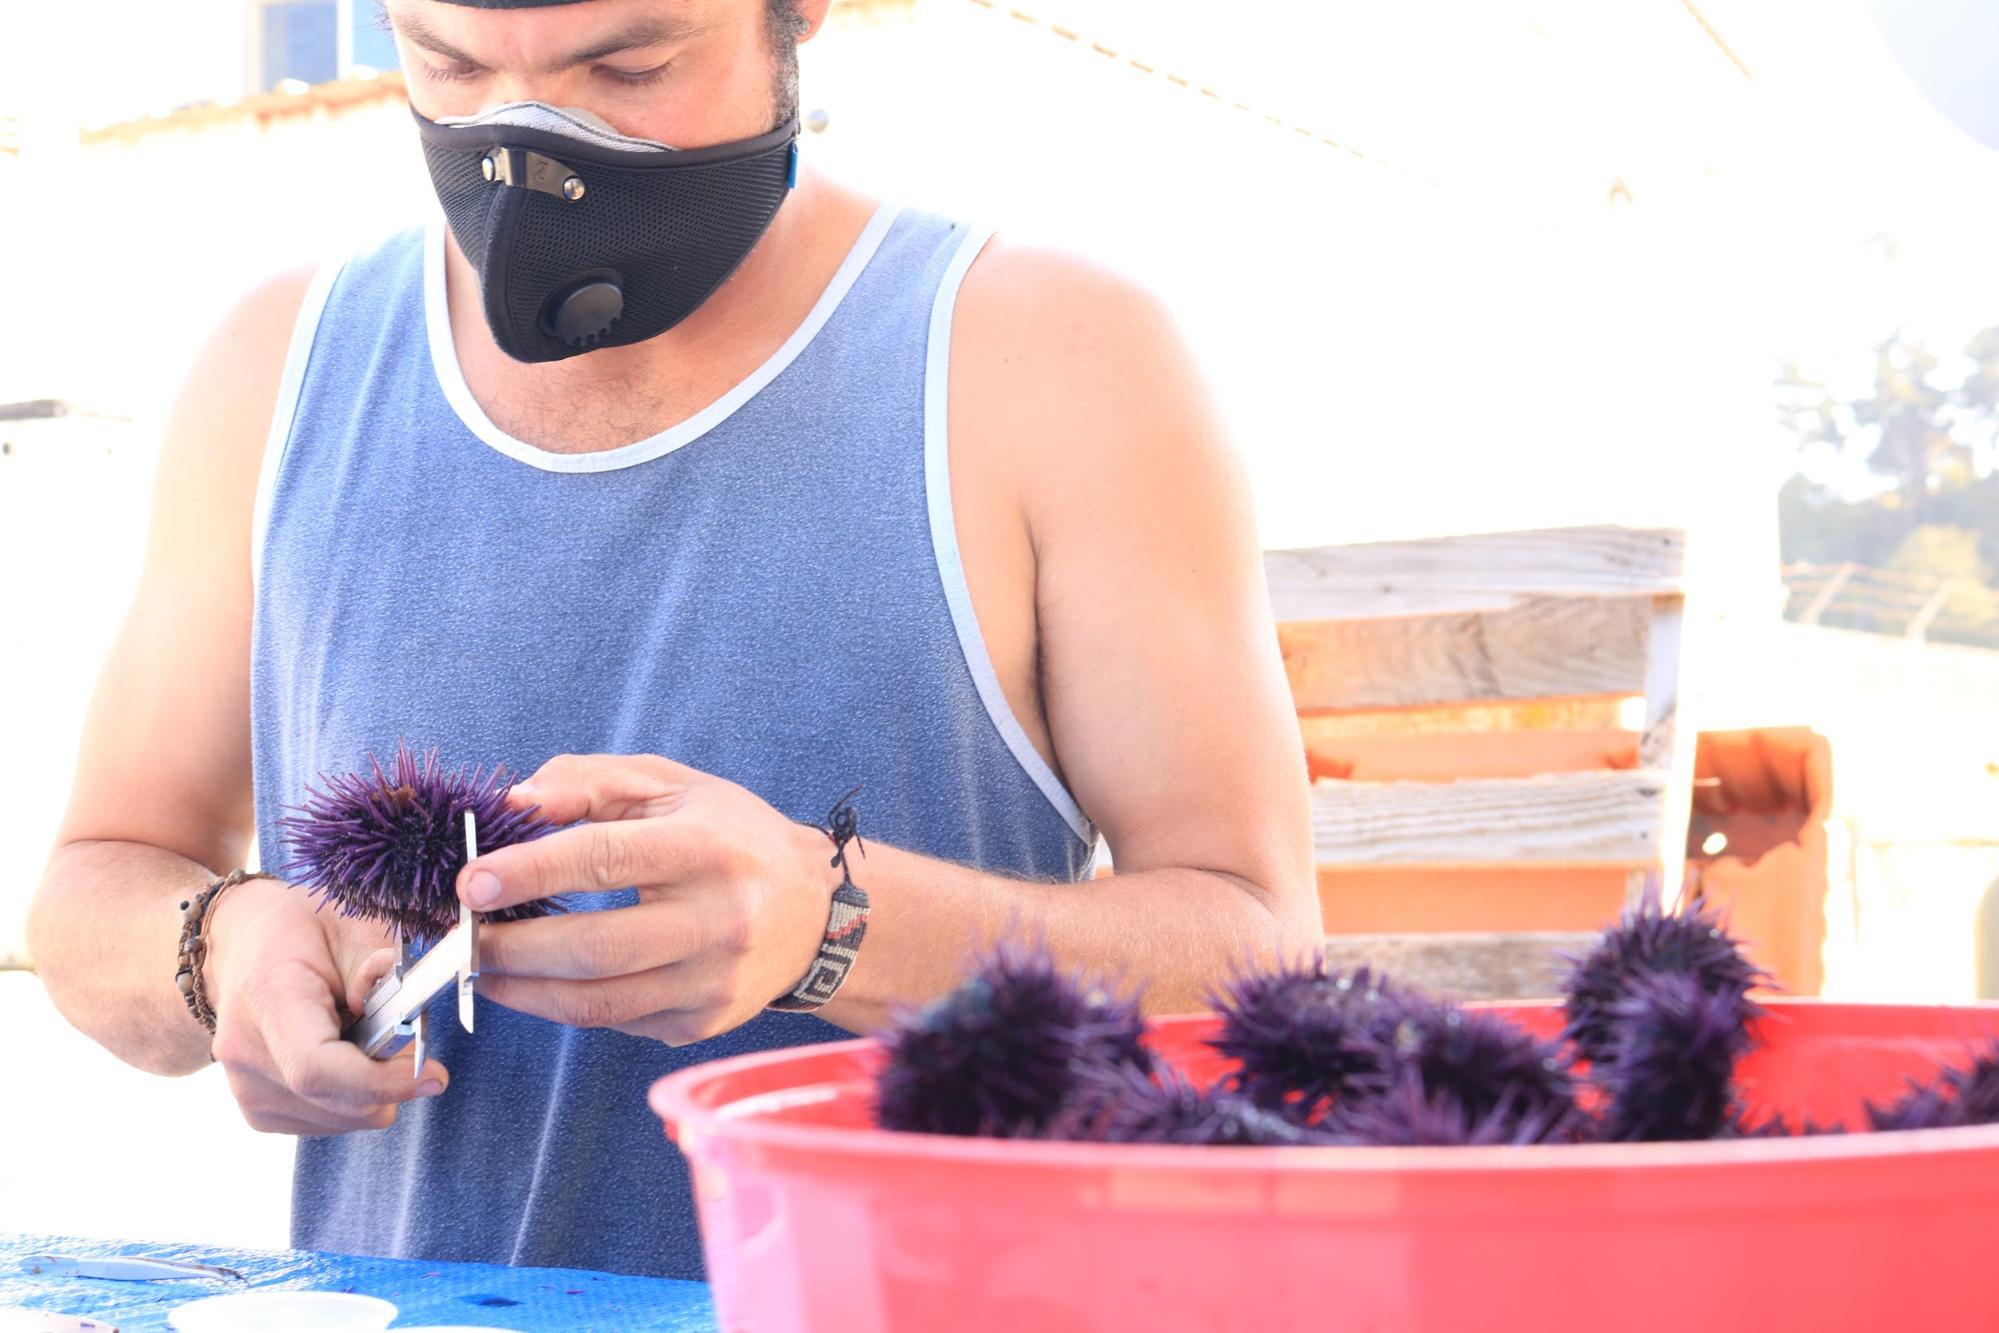 A man in a blue tank top and mask measures a purple urchin with a metal tool. In front of him, there is a large, red, plastic bucket of purple urchins.